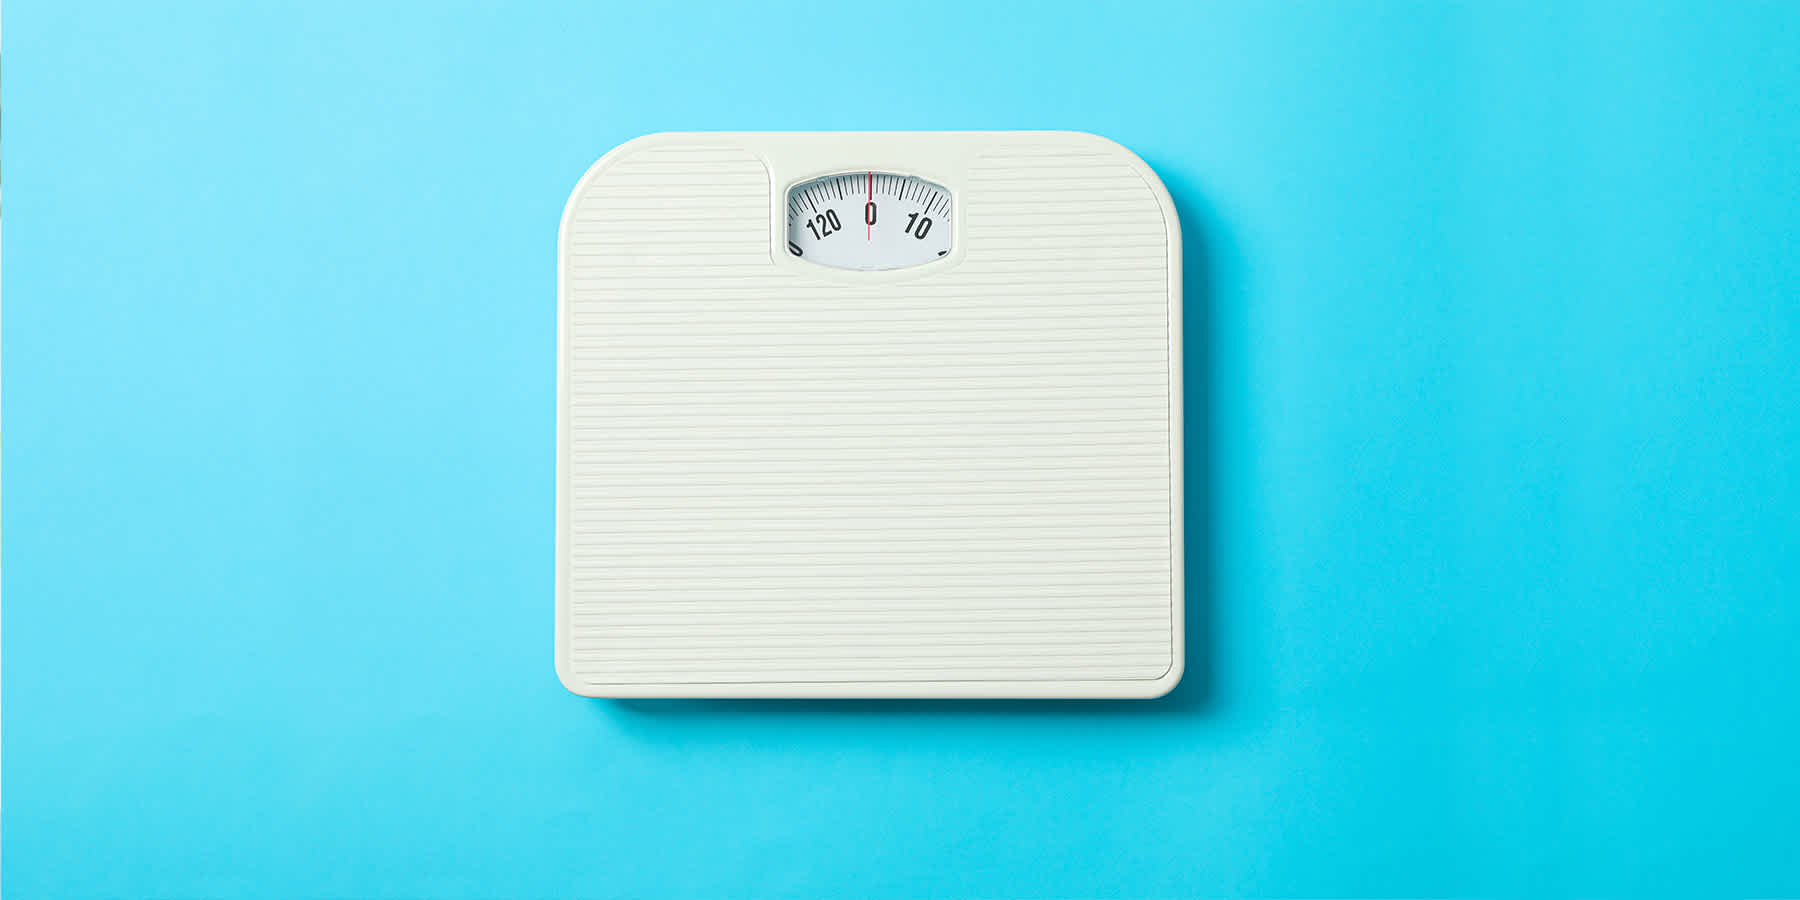 Weight Loss Prescription Online: What You Need to Know | Everlywell